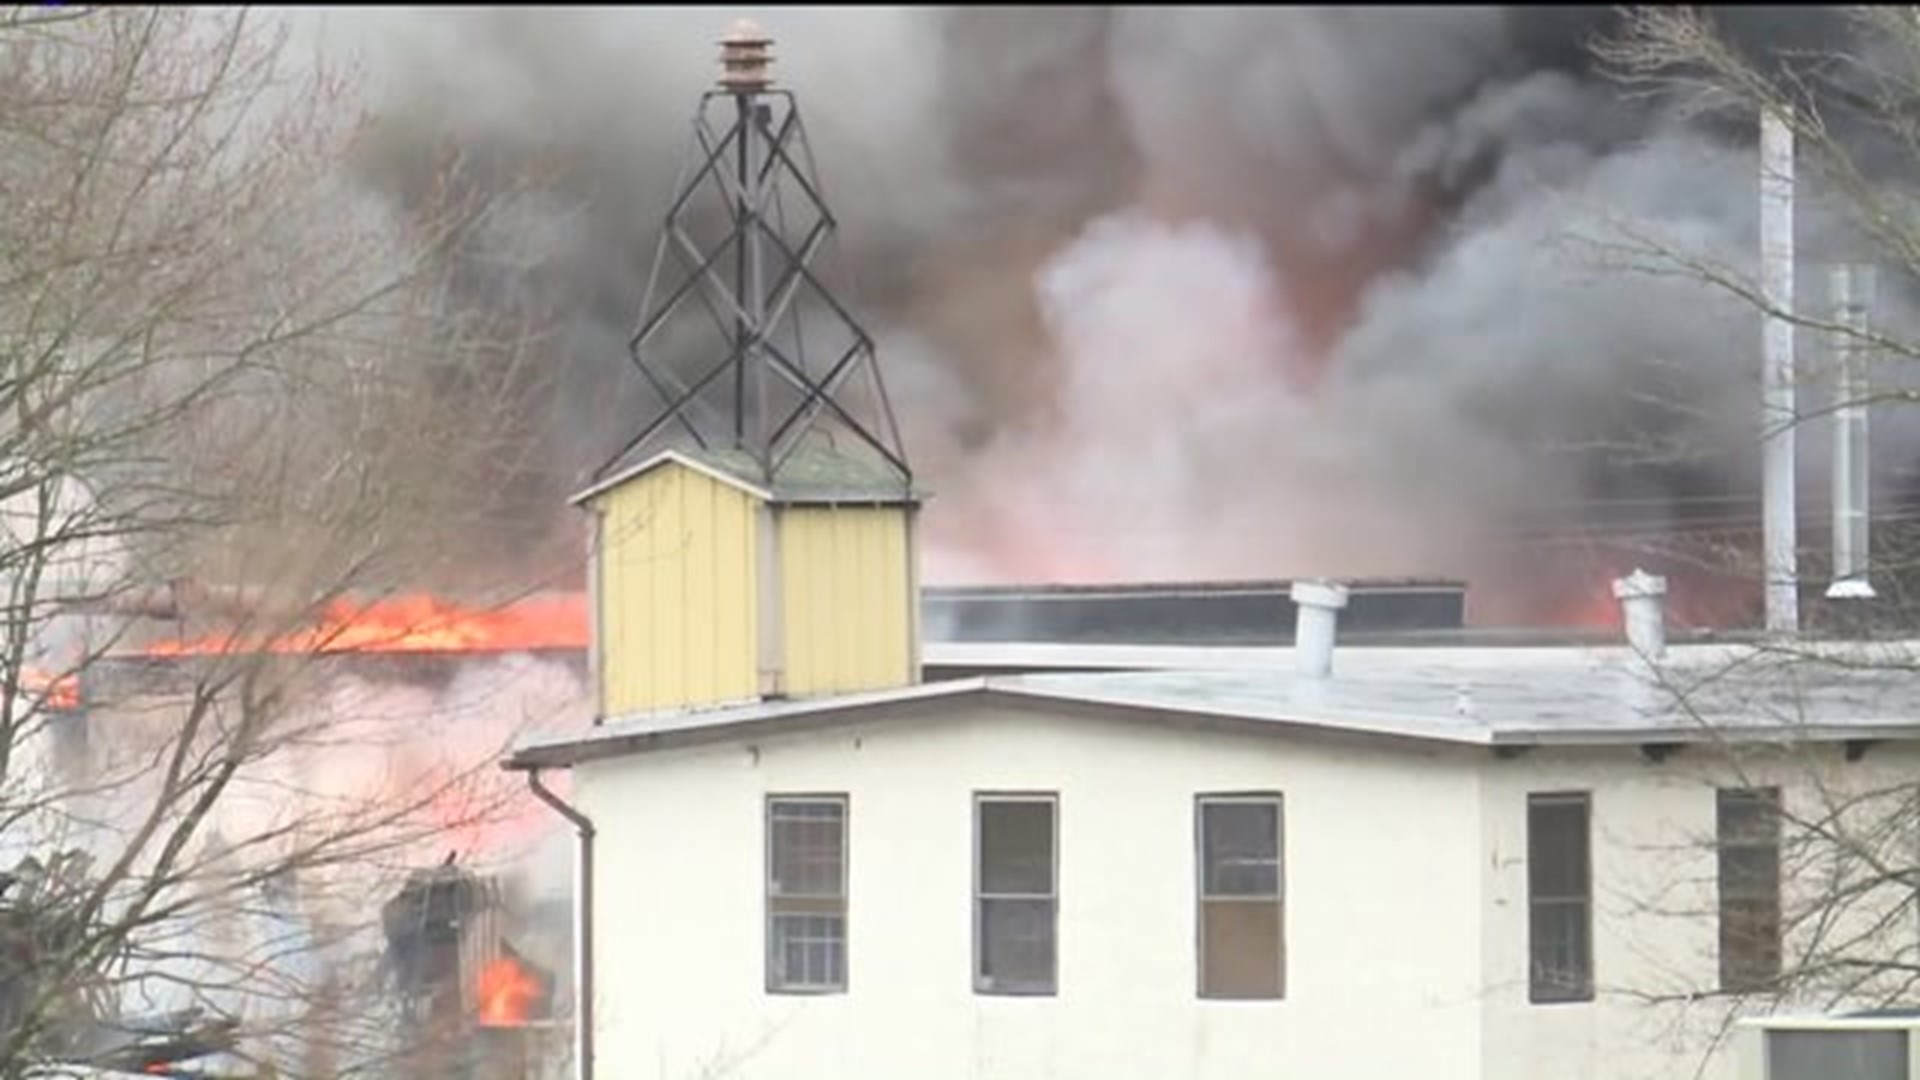 Massive blaze in Glastonbury factory impacts employees, nearby residents